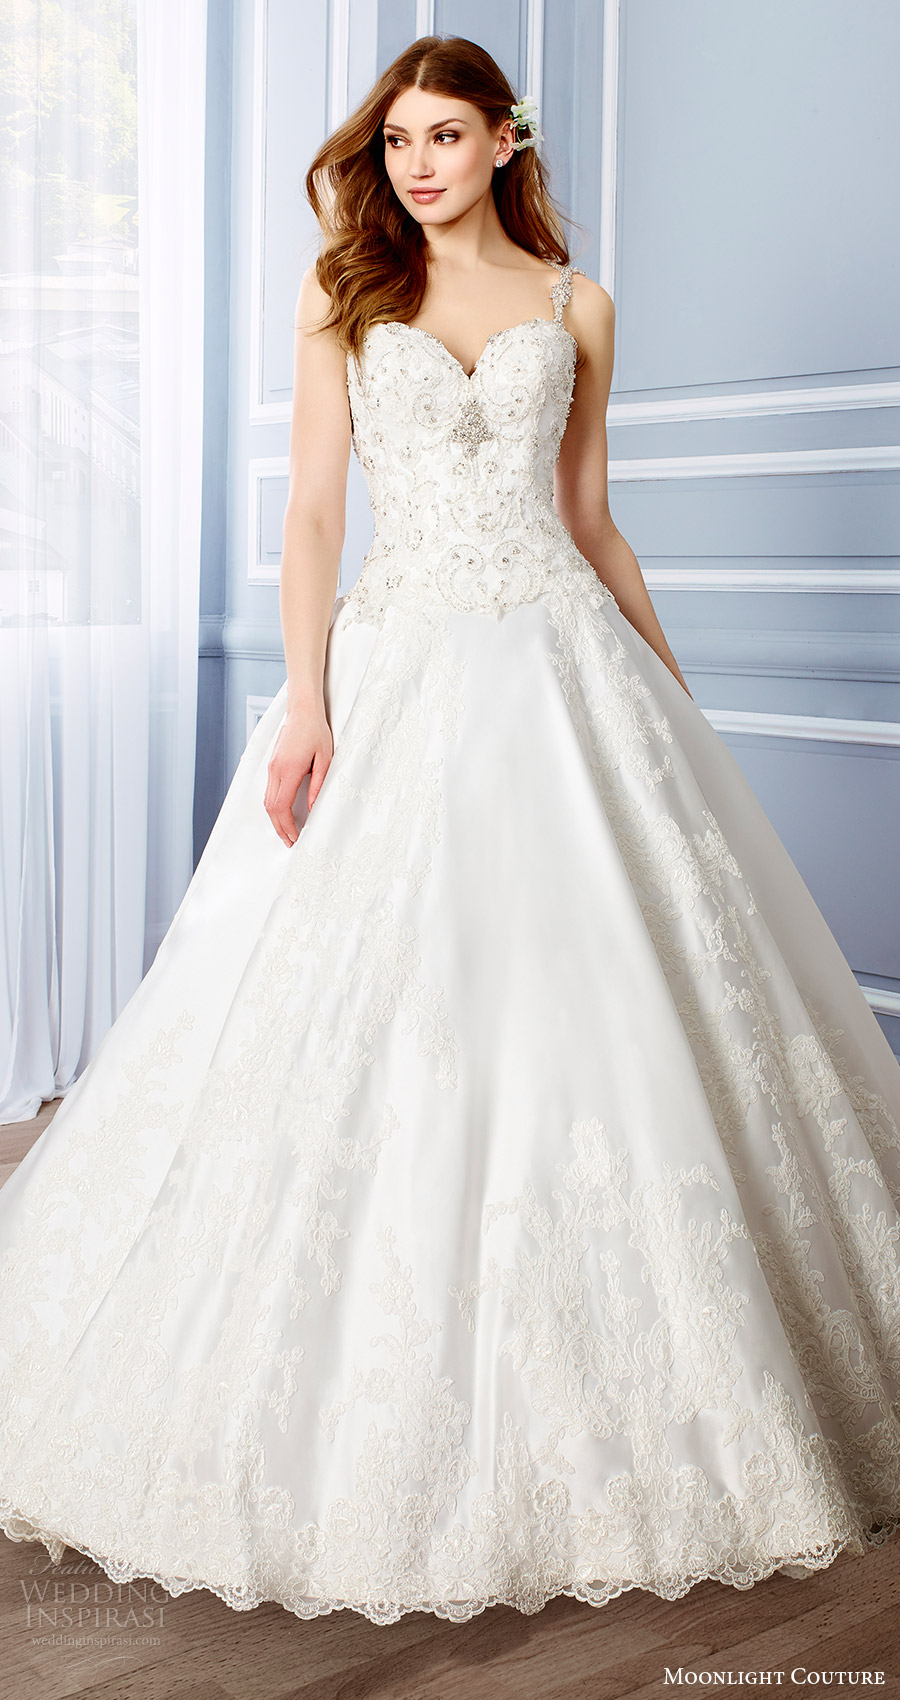 moonlight couture bridal fall 2016 sleeveless beaded straps sweetheart lace ball gown wedding dress (h1316) mv princess